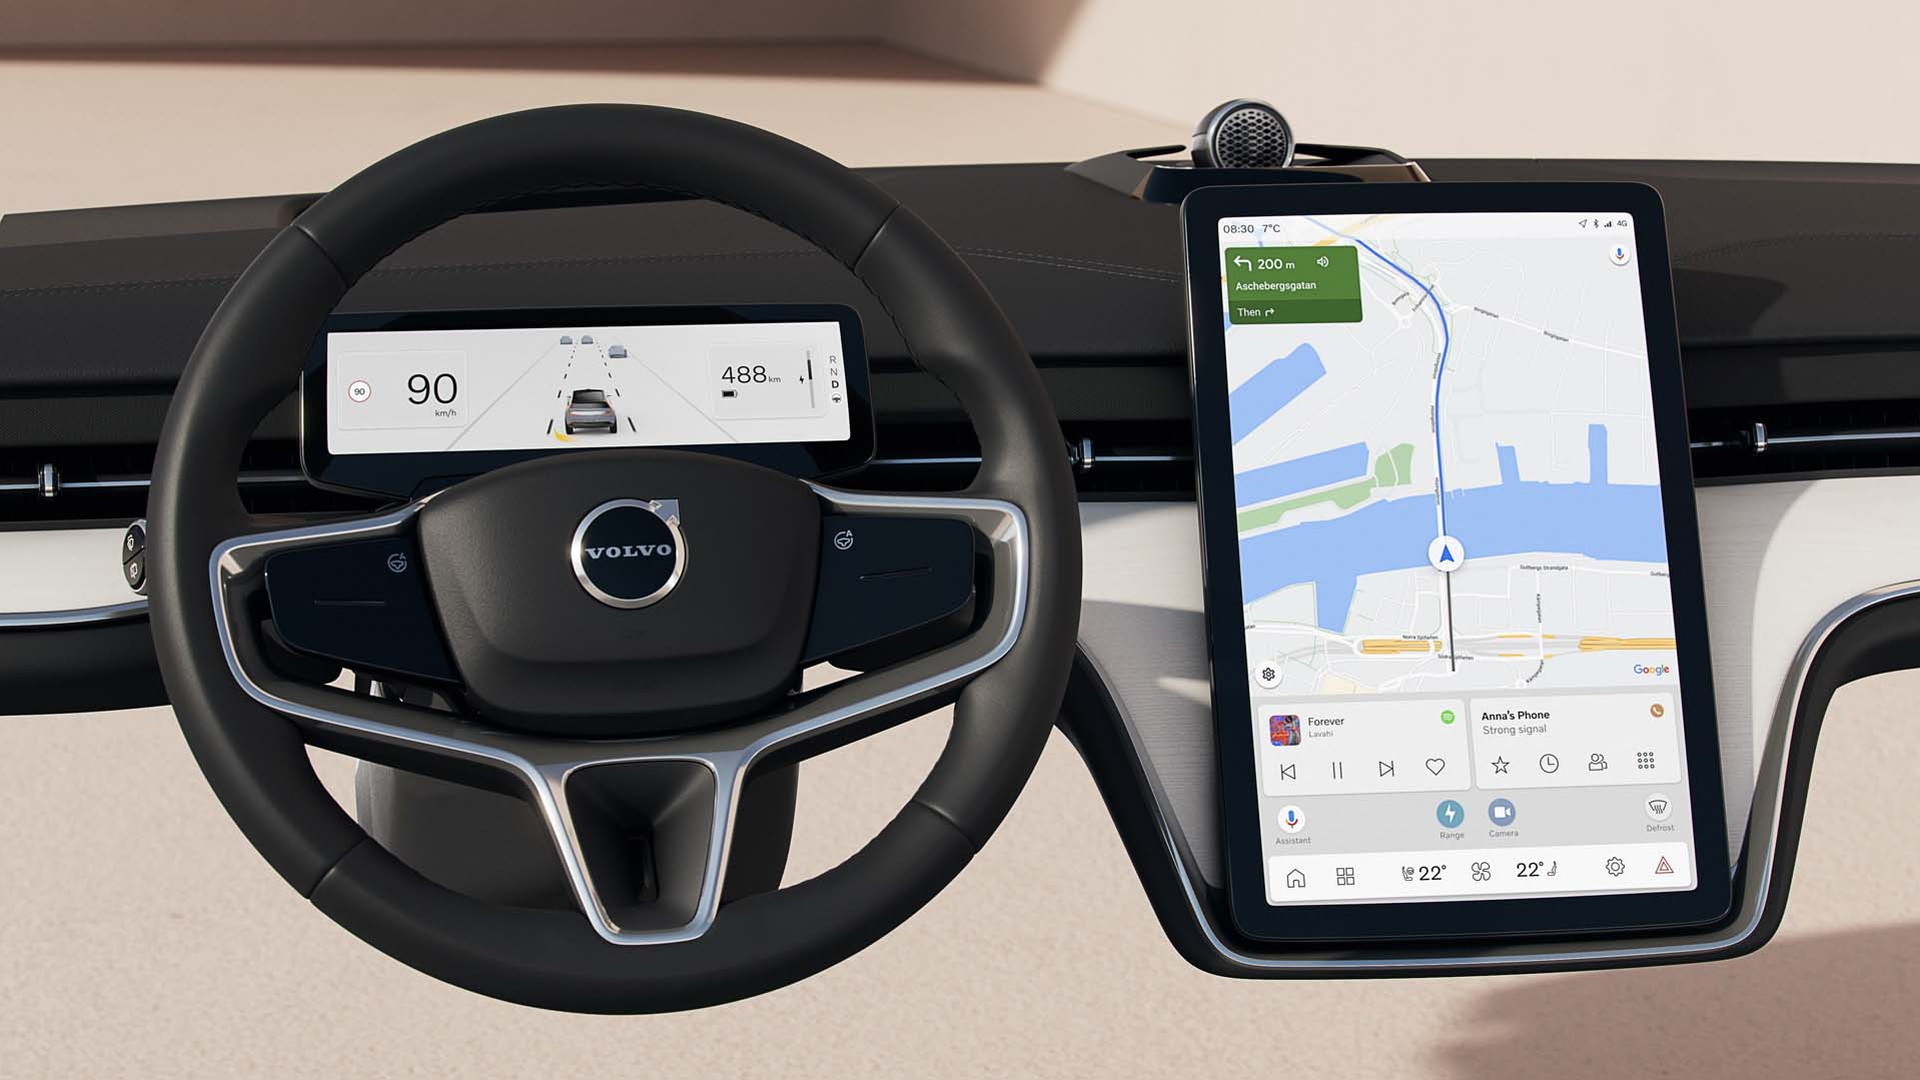 Contextual user interface in the Volvo EX90